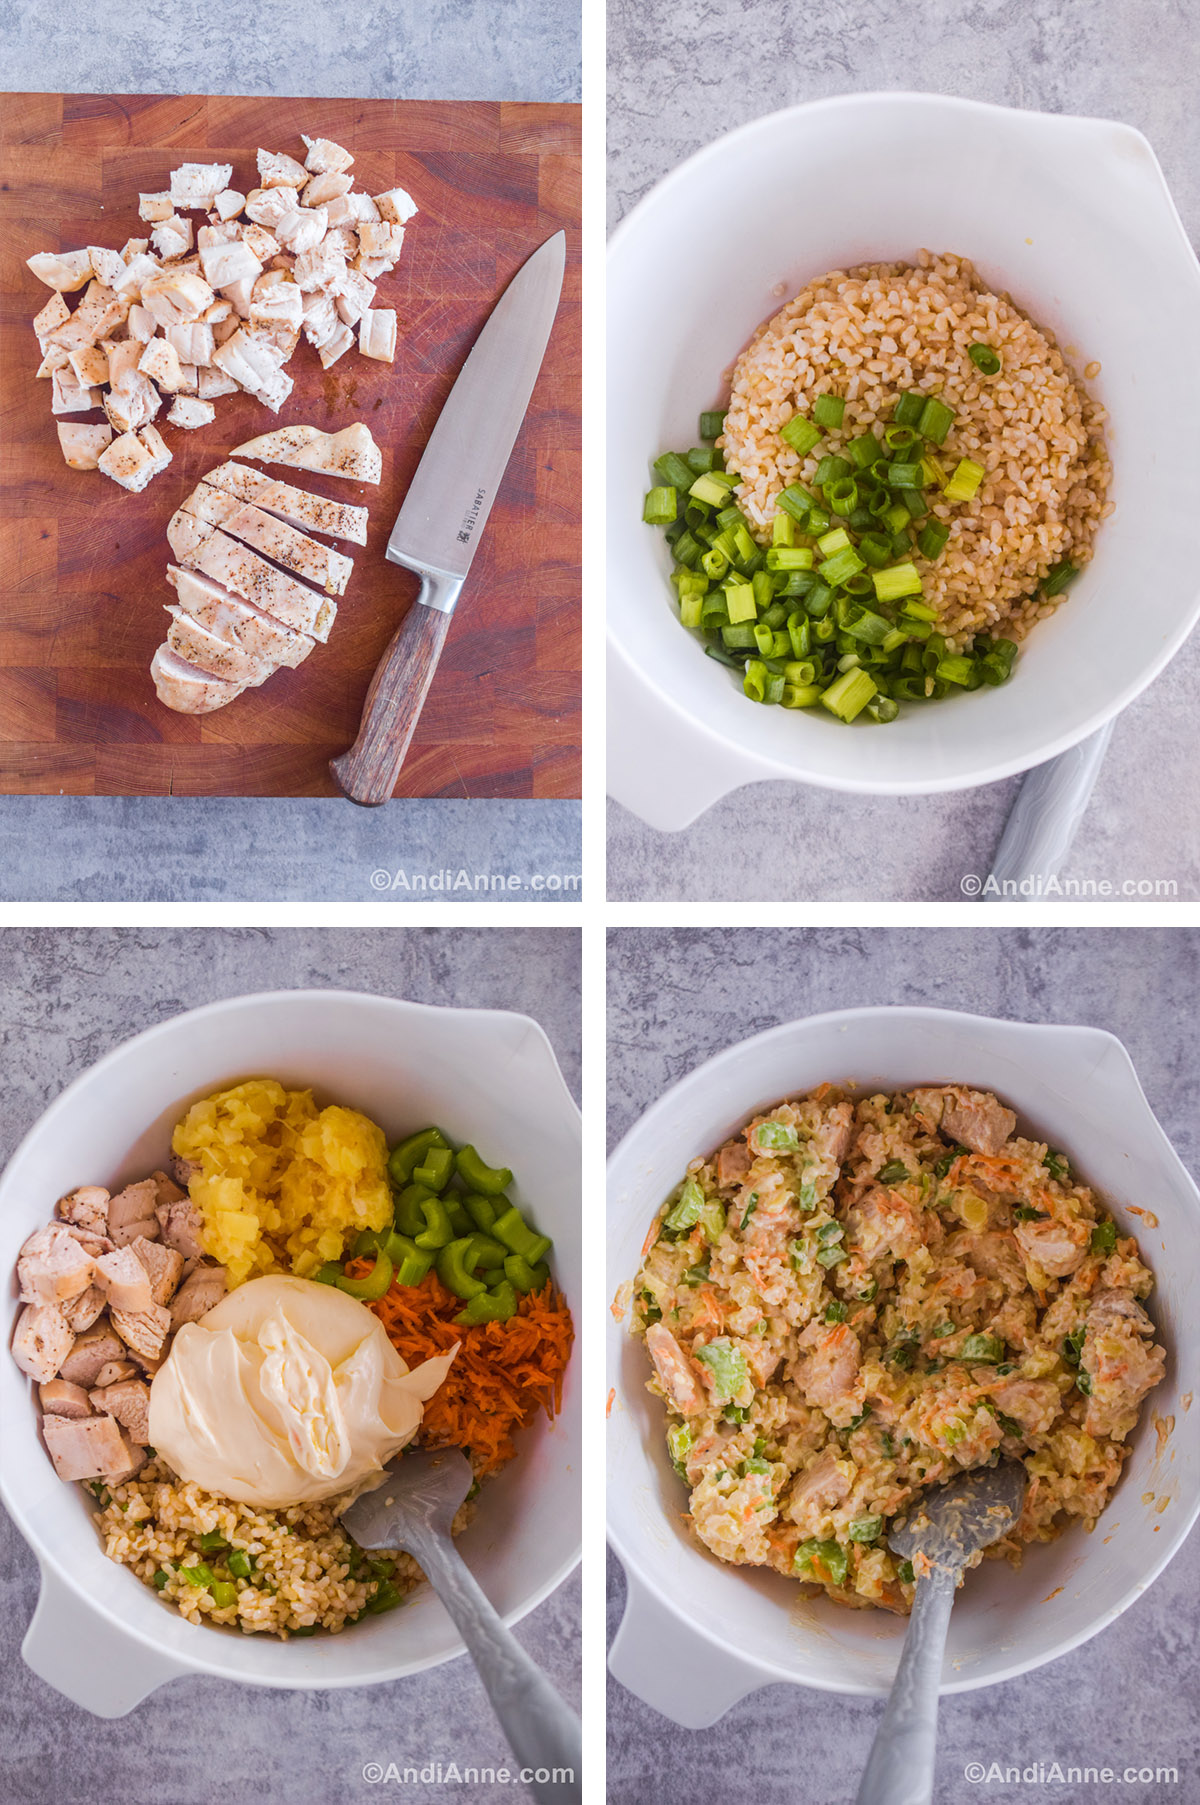 Four images showing steps to make the recipe. First is chopped chicken and a knife. A bowl of rice and green onion. Chopped chicken, crushed pineapple, rice, shredded carrots and mayonnaise in a white bowl with a spatula. All ingredients mixed together in a white bowl with a spatula.